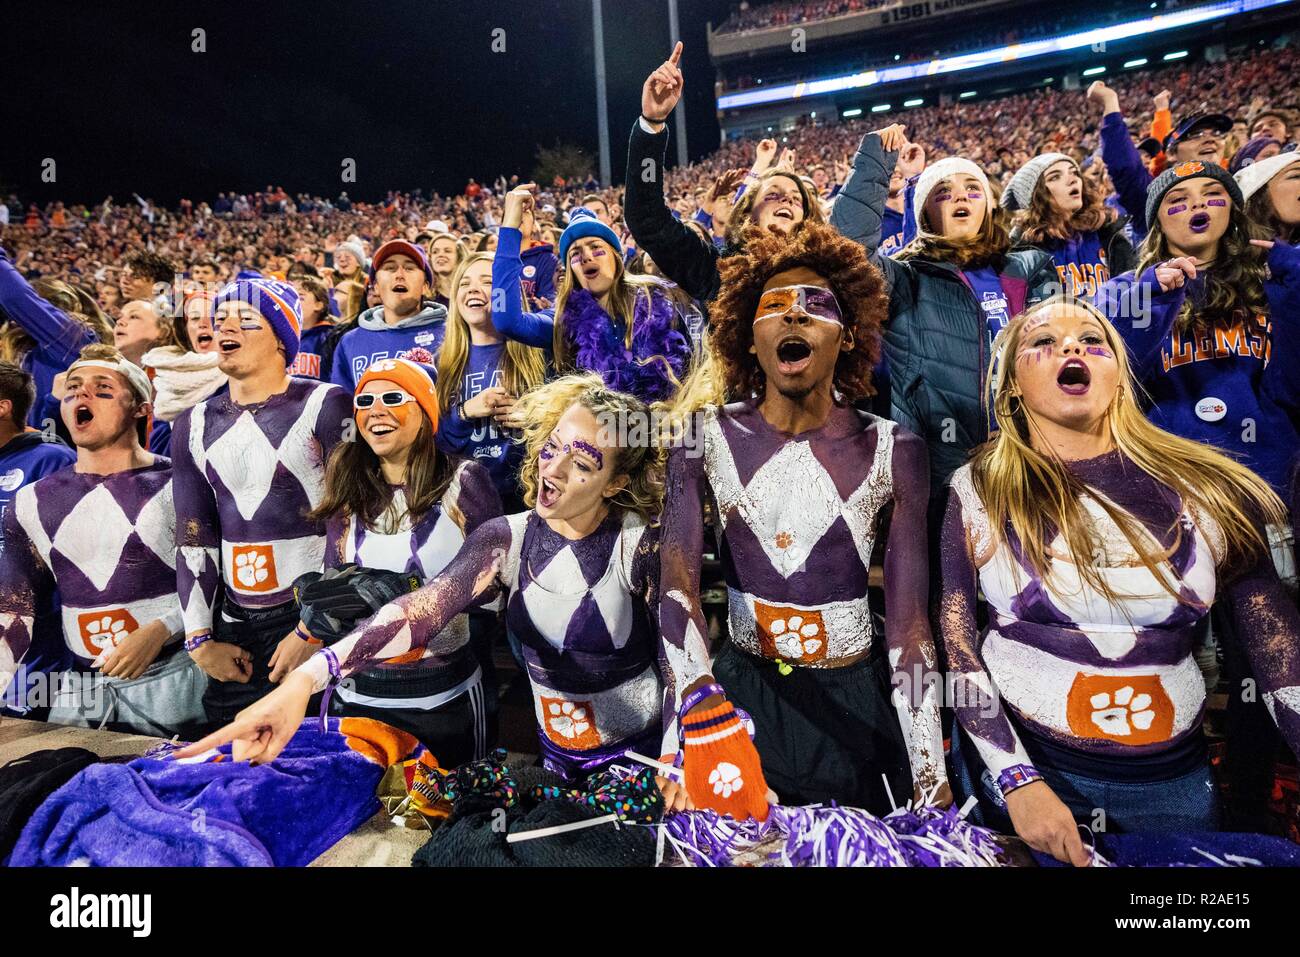 Clemson student fans during the NCAA college football game between Duke and Clemson on Saturday November 17, 2018 at Memorial Stadium in Clemson, SC. Jacob Kupferman/CSM Stock Photo